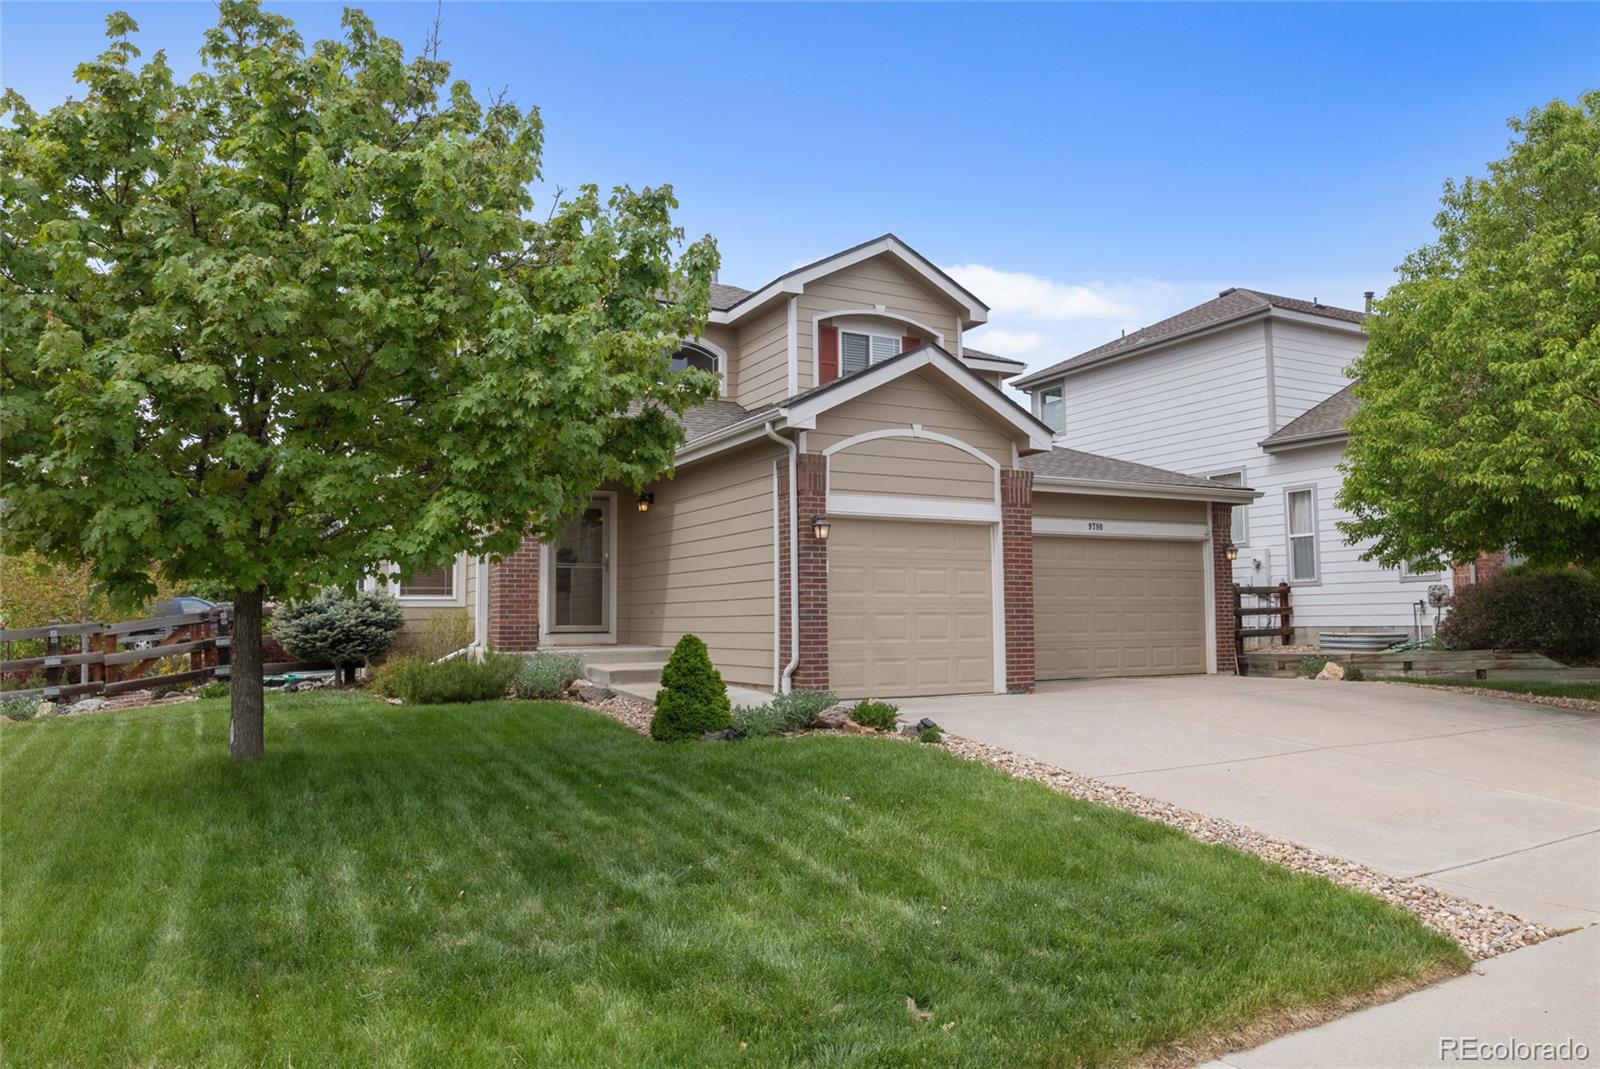 9780 s crystal lake drive, Littleton sold home. Closed on 2024-06-18 for $673,500.